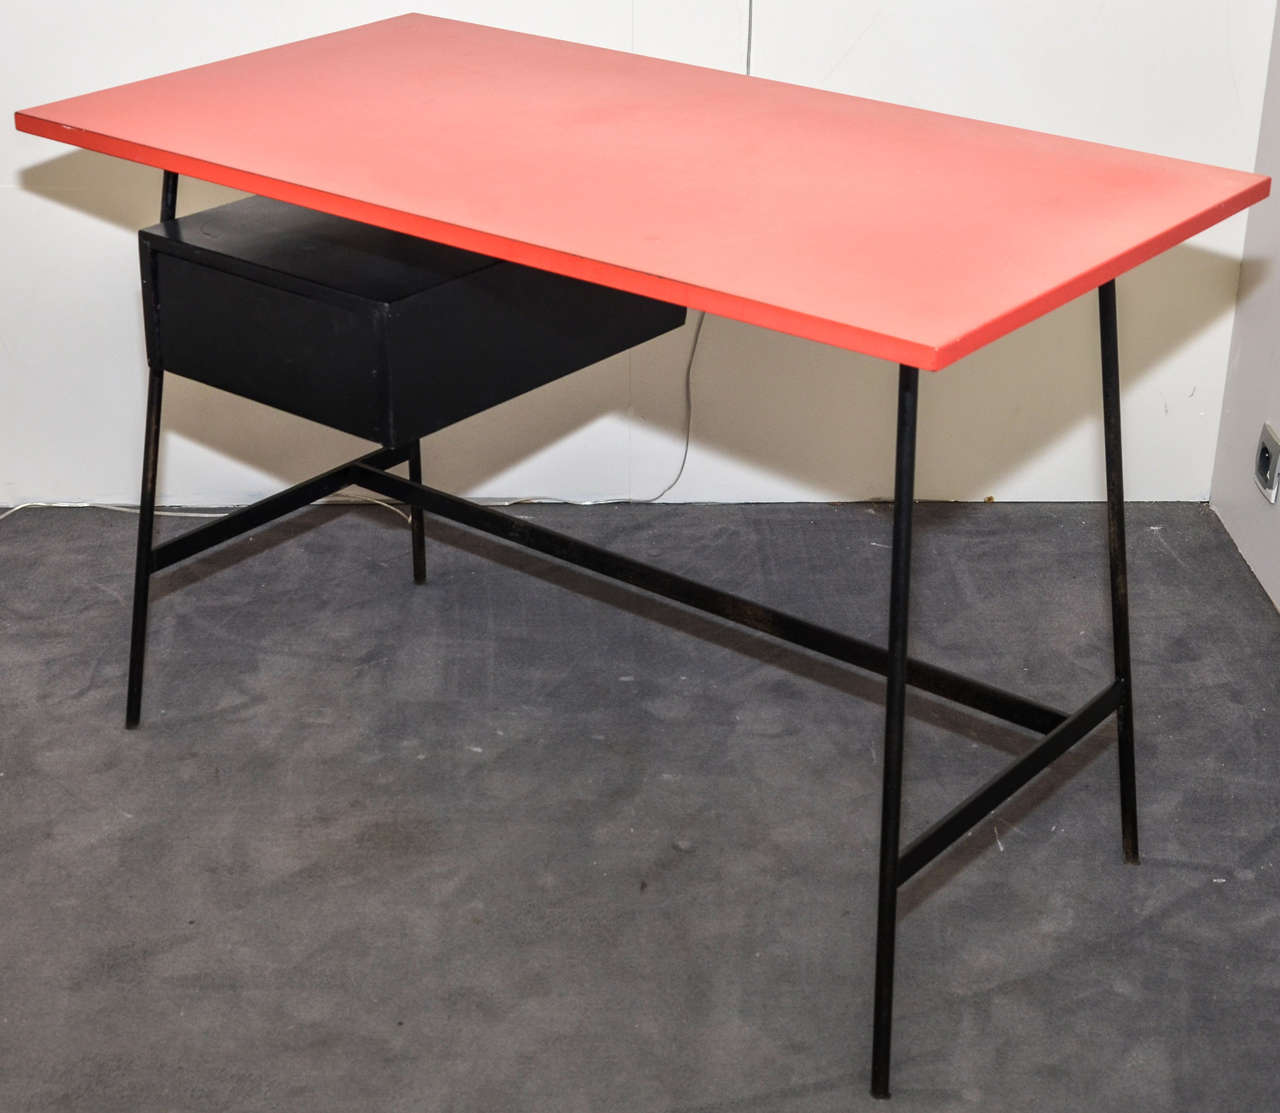 1950s desk by Pierre Paulin with base in black patina metal; top surface in red melamine; one wooden drawer in black patina.